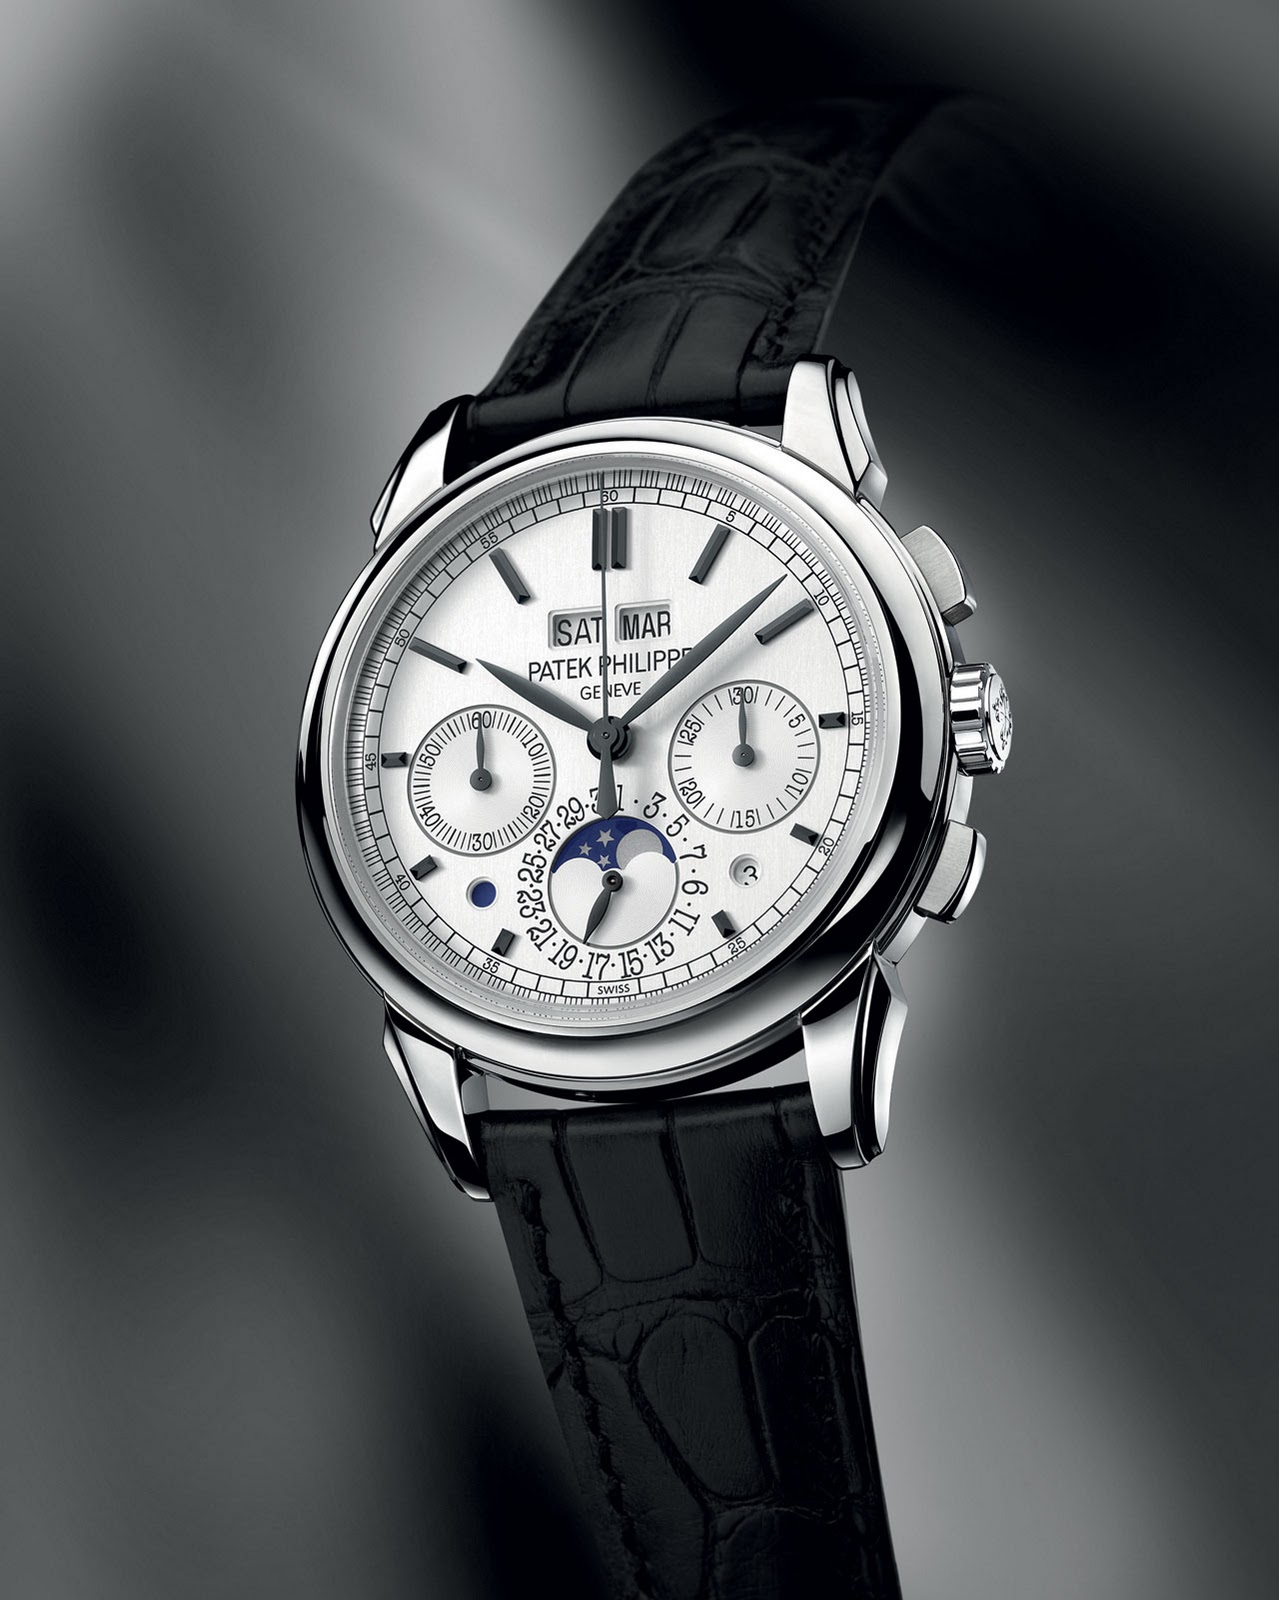 Cars, Watches and Tech - Boxfox1.com: Patek Philippe - Perpetual ...